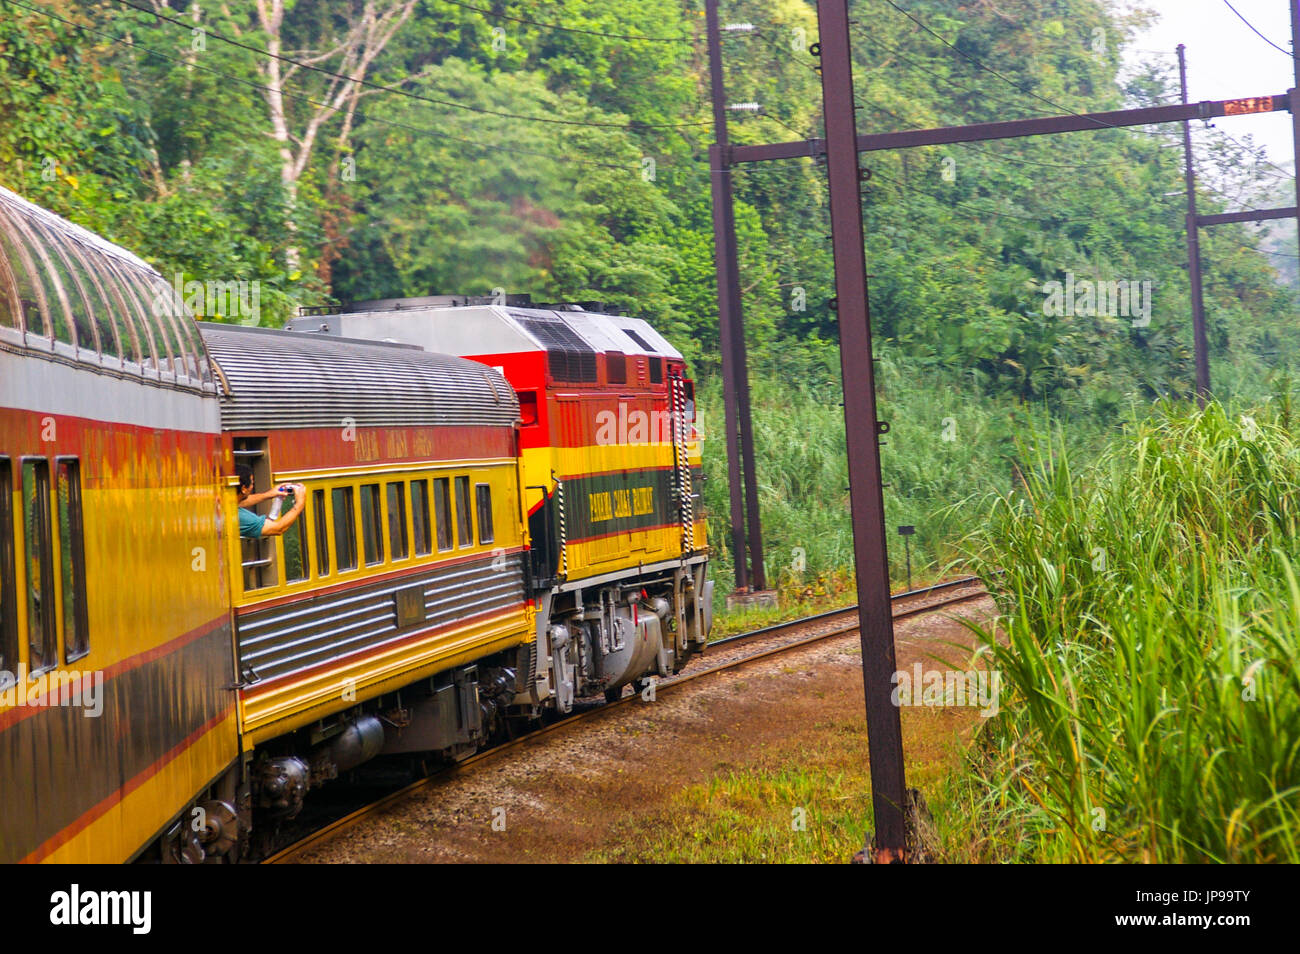 Views of the panama canal railway train in the rainforest traveling from Panama City to Colon Stock Photo